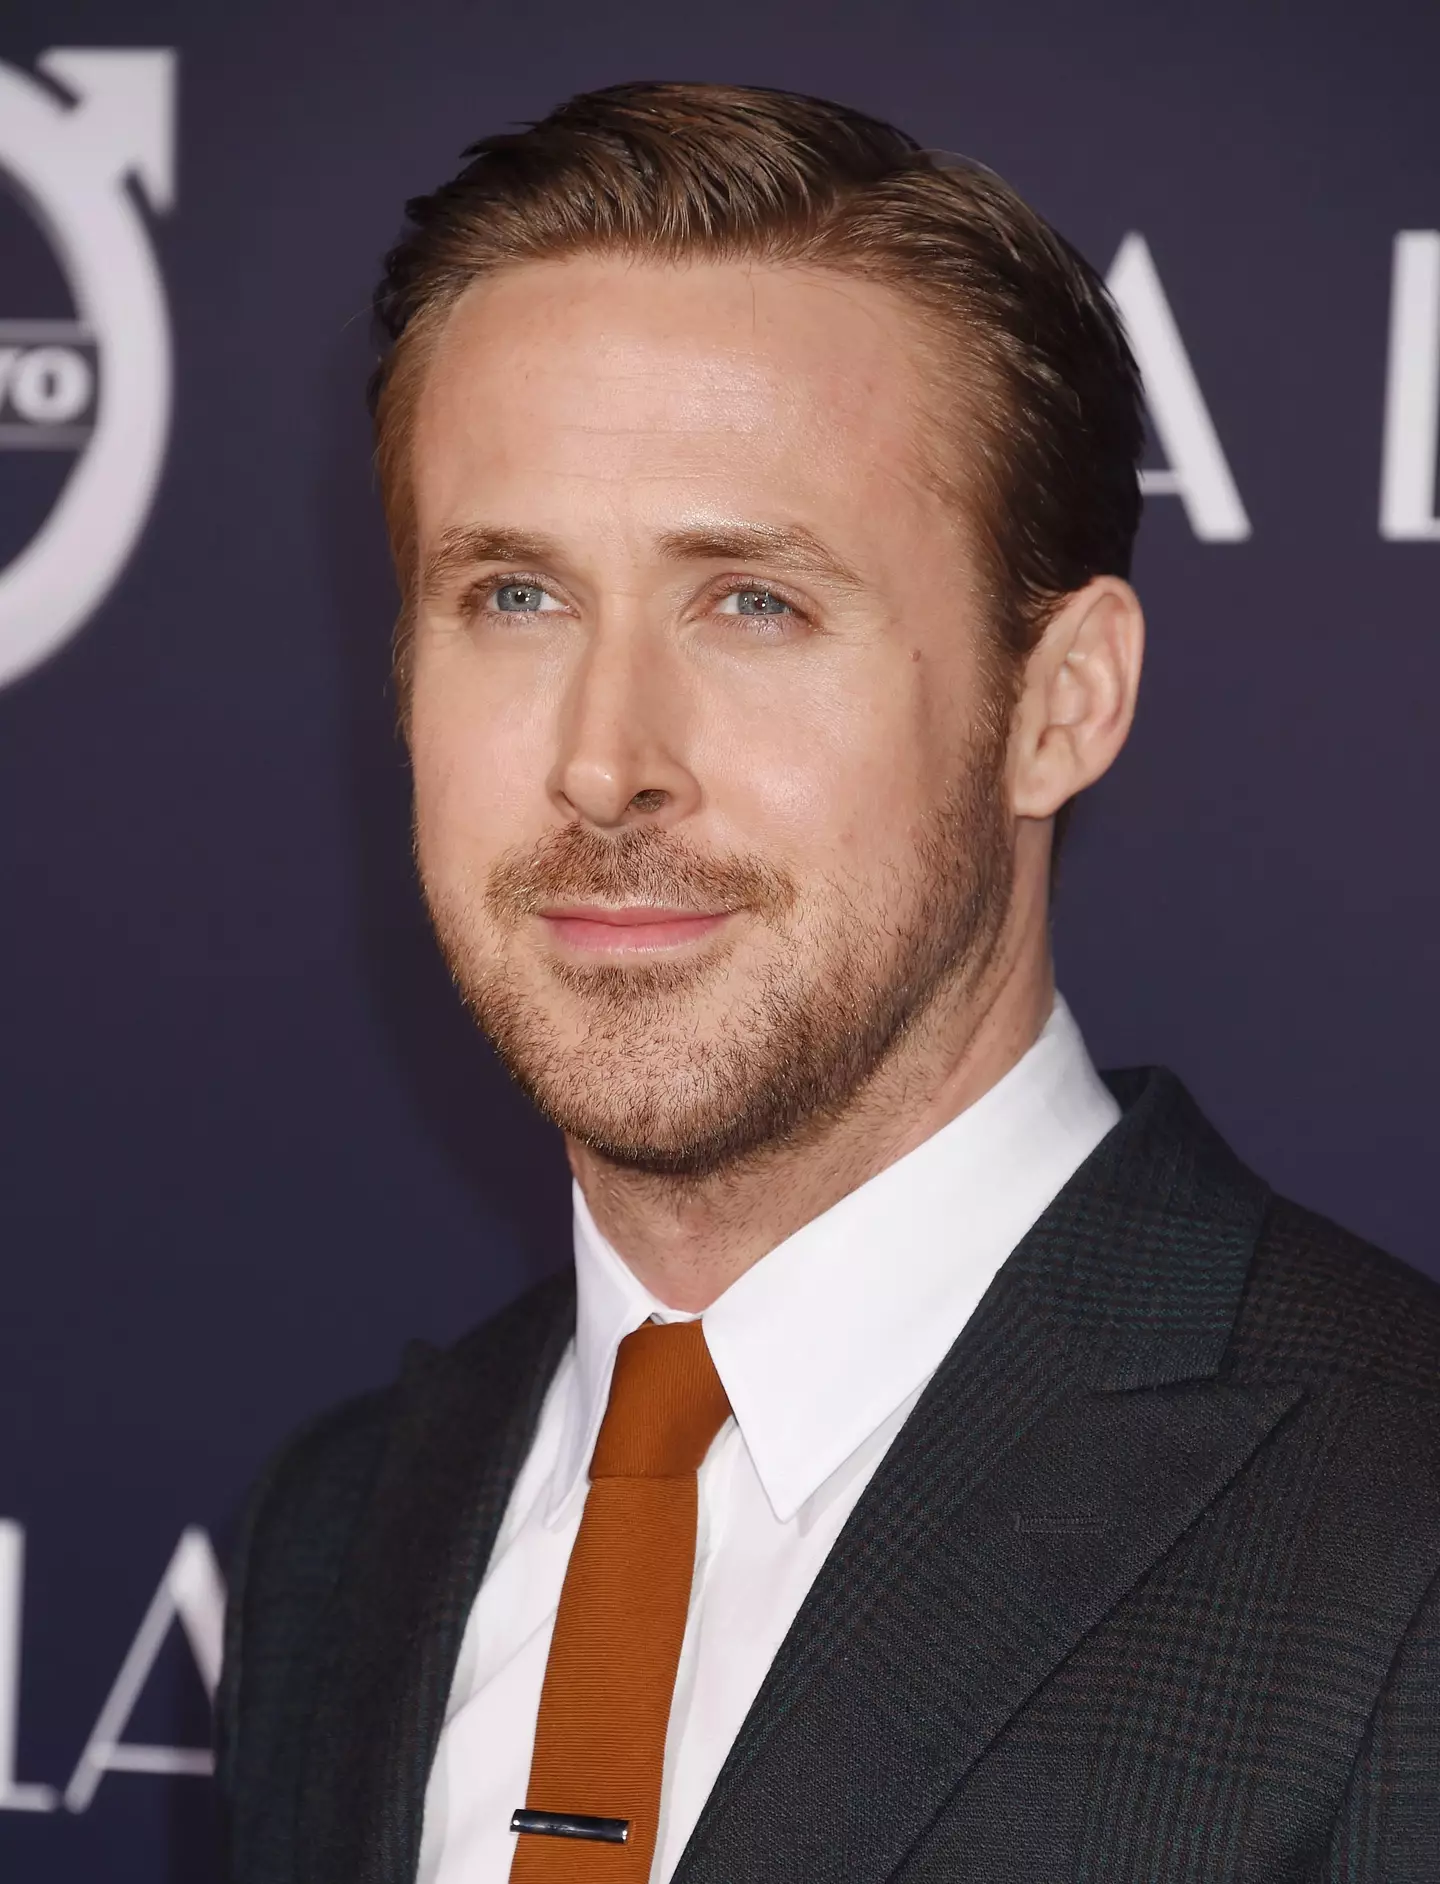 Ryan Gosling's weight trick didn't exactly go to plan, though.